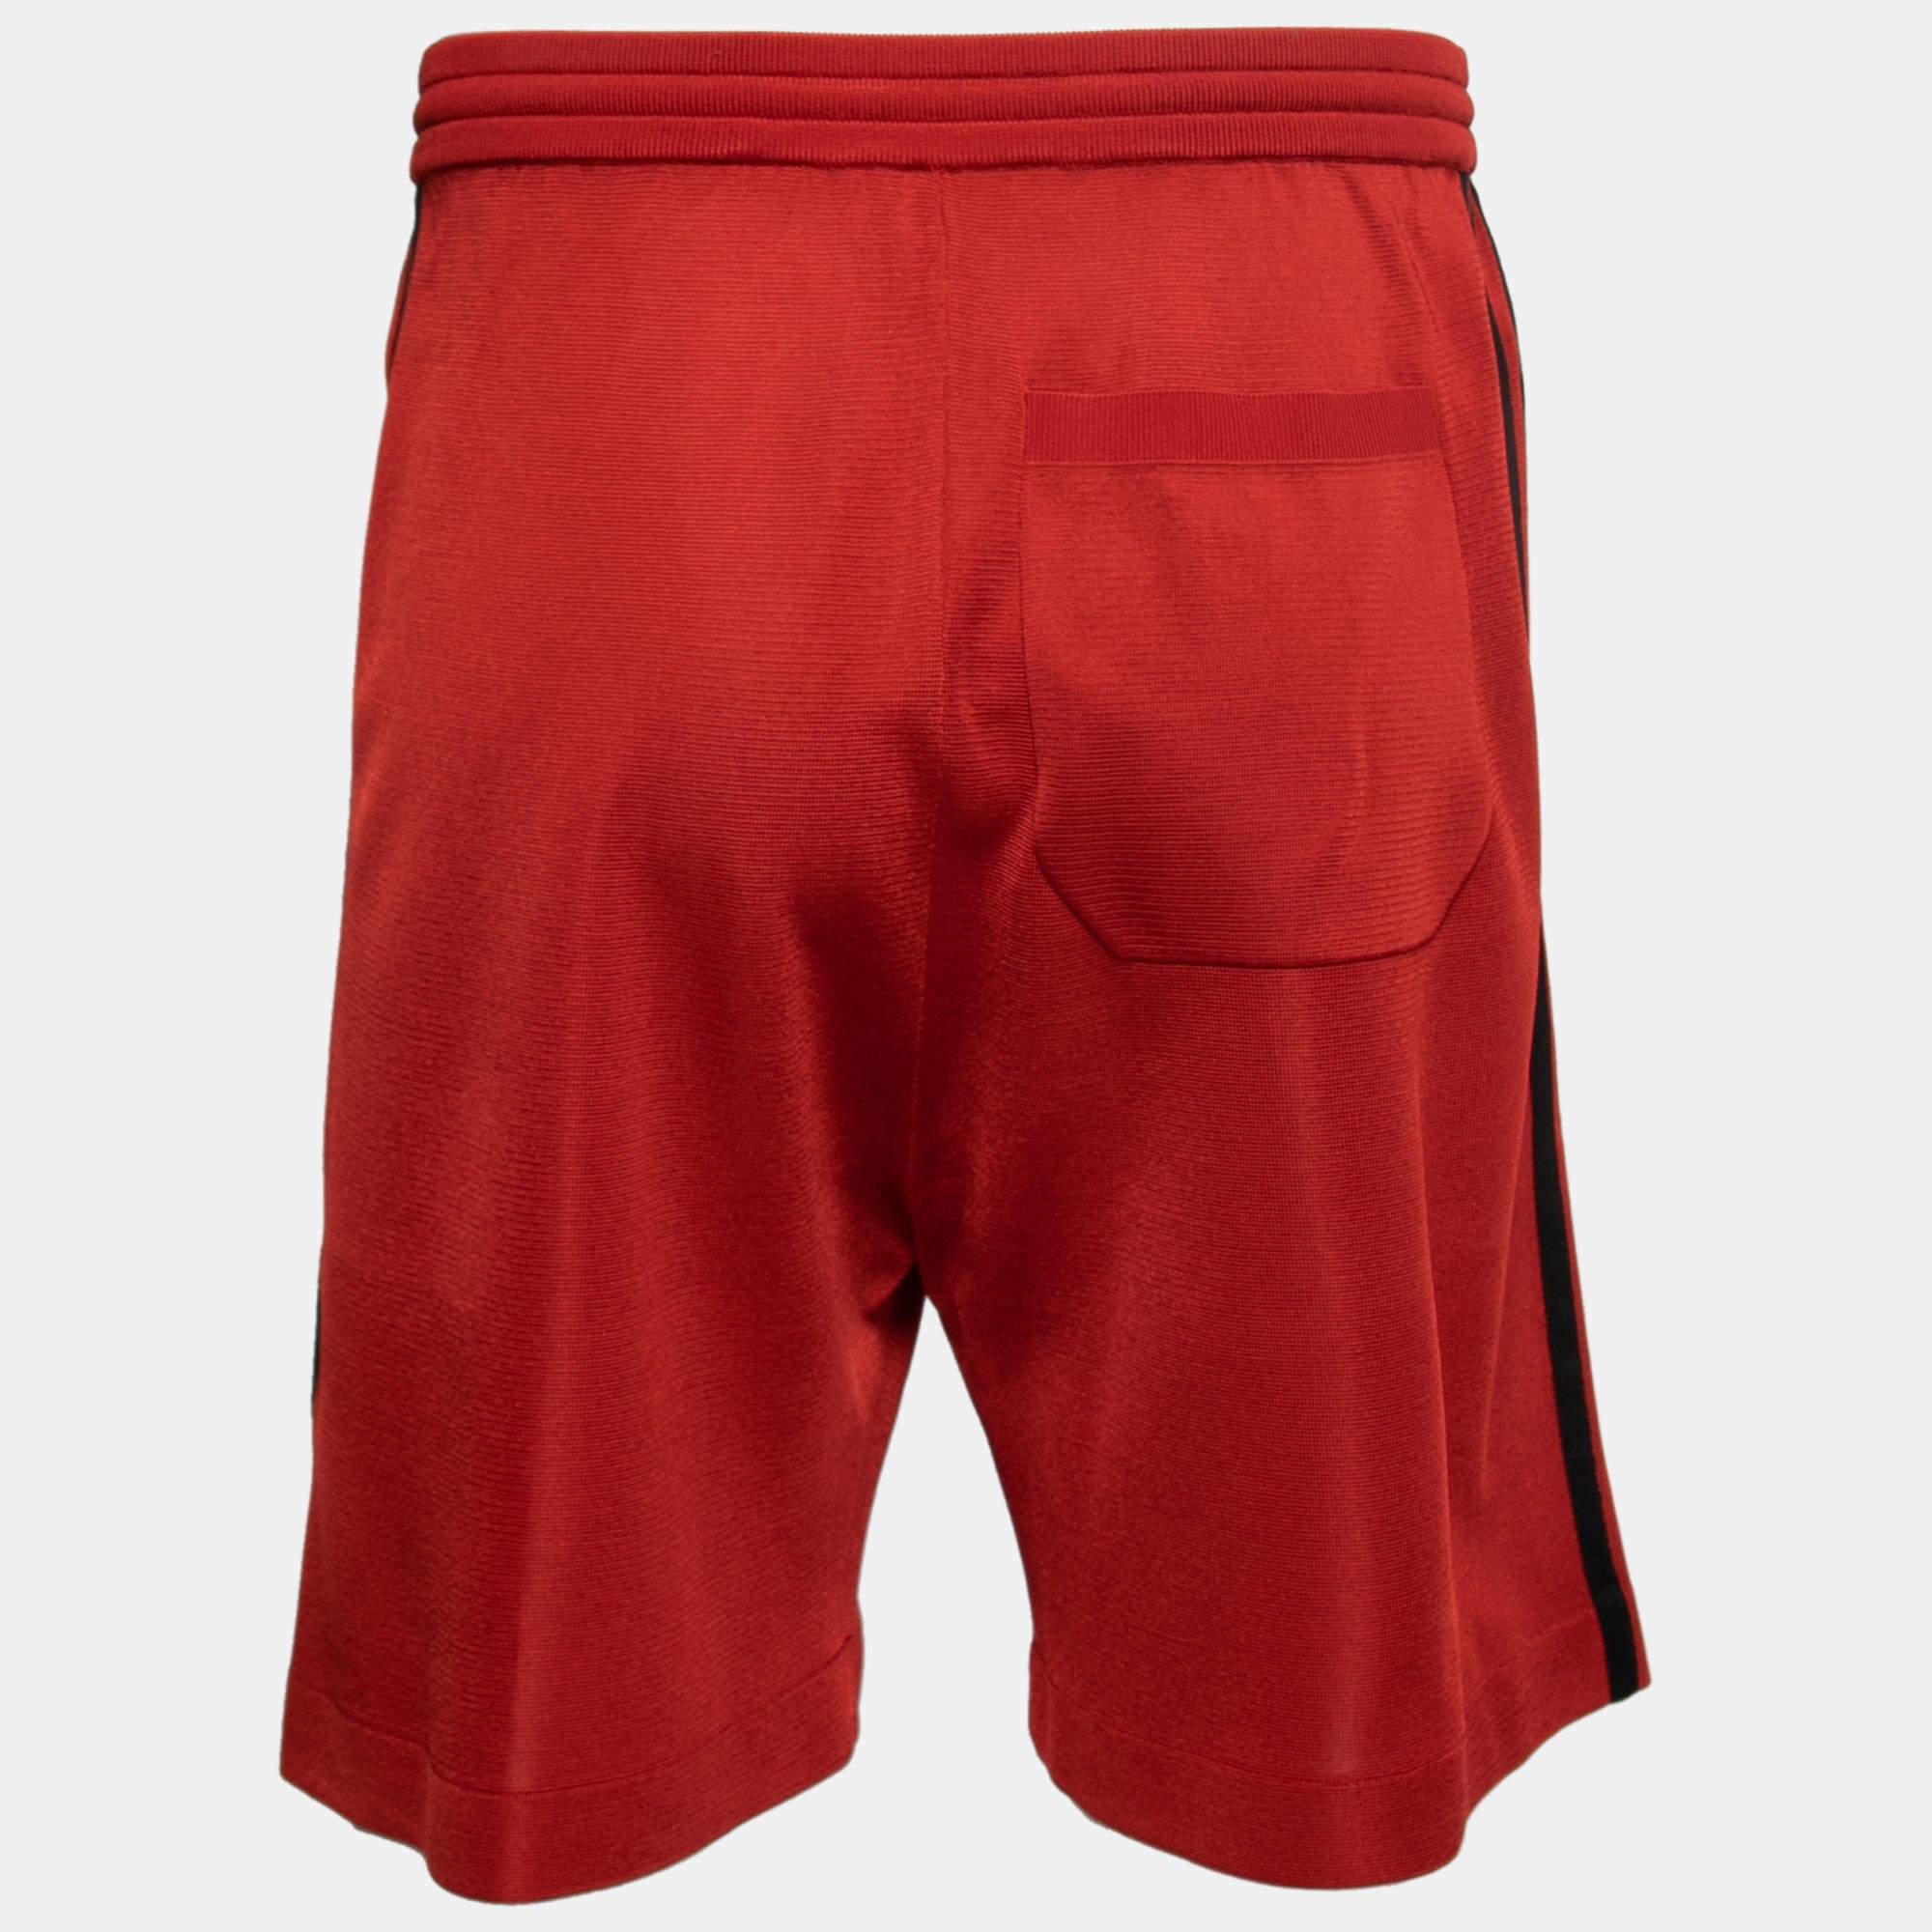 These shorts by Gucci X adidas are a comfy and stylish pick. They feature the triple adidas stripes and the Interlocking G logo. Easy to style and relaxed in appearance, these shorts will be your favorite!

